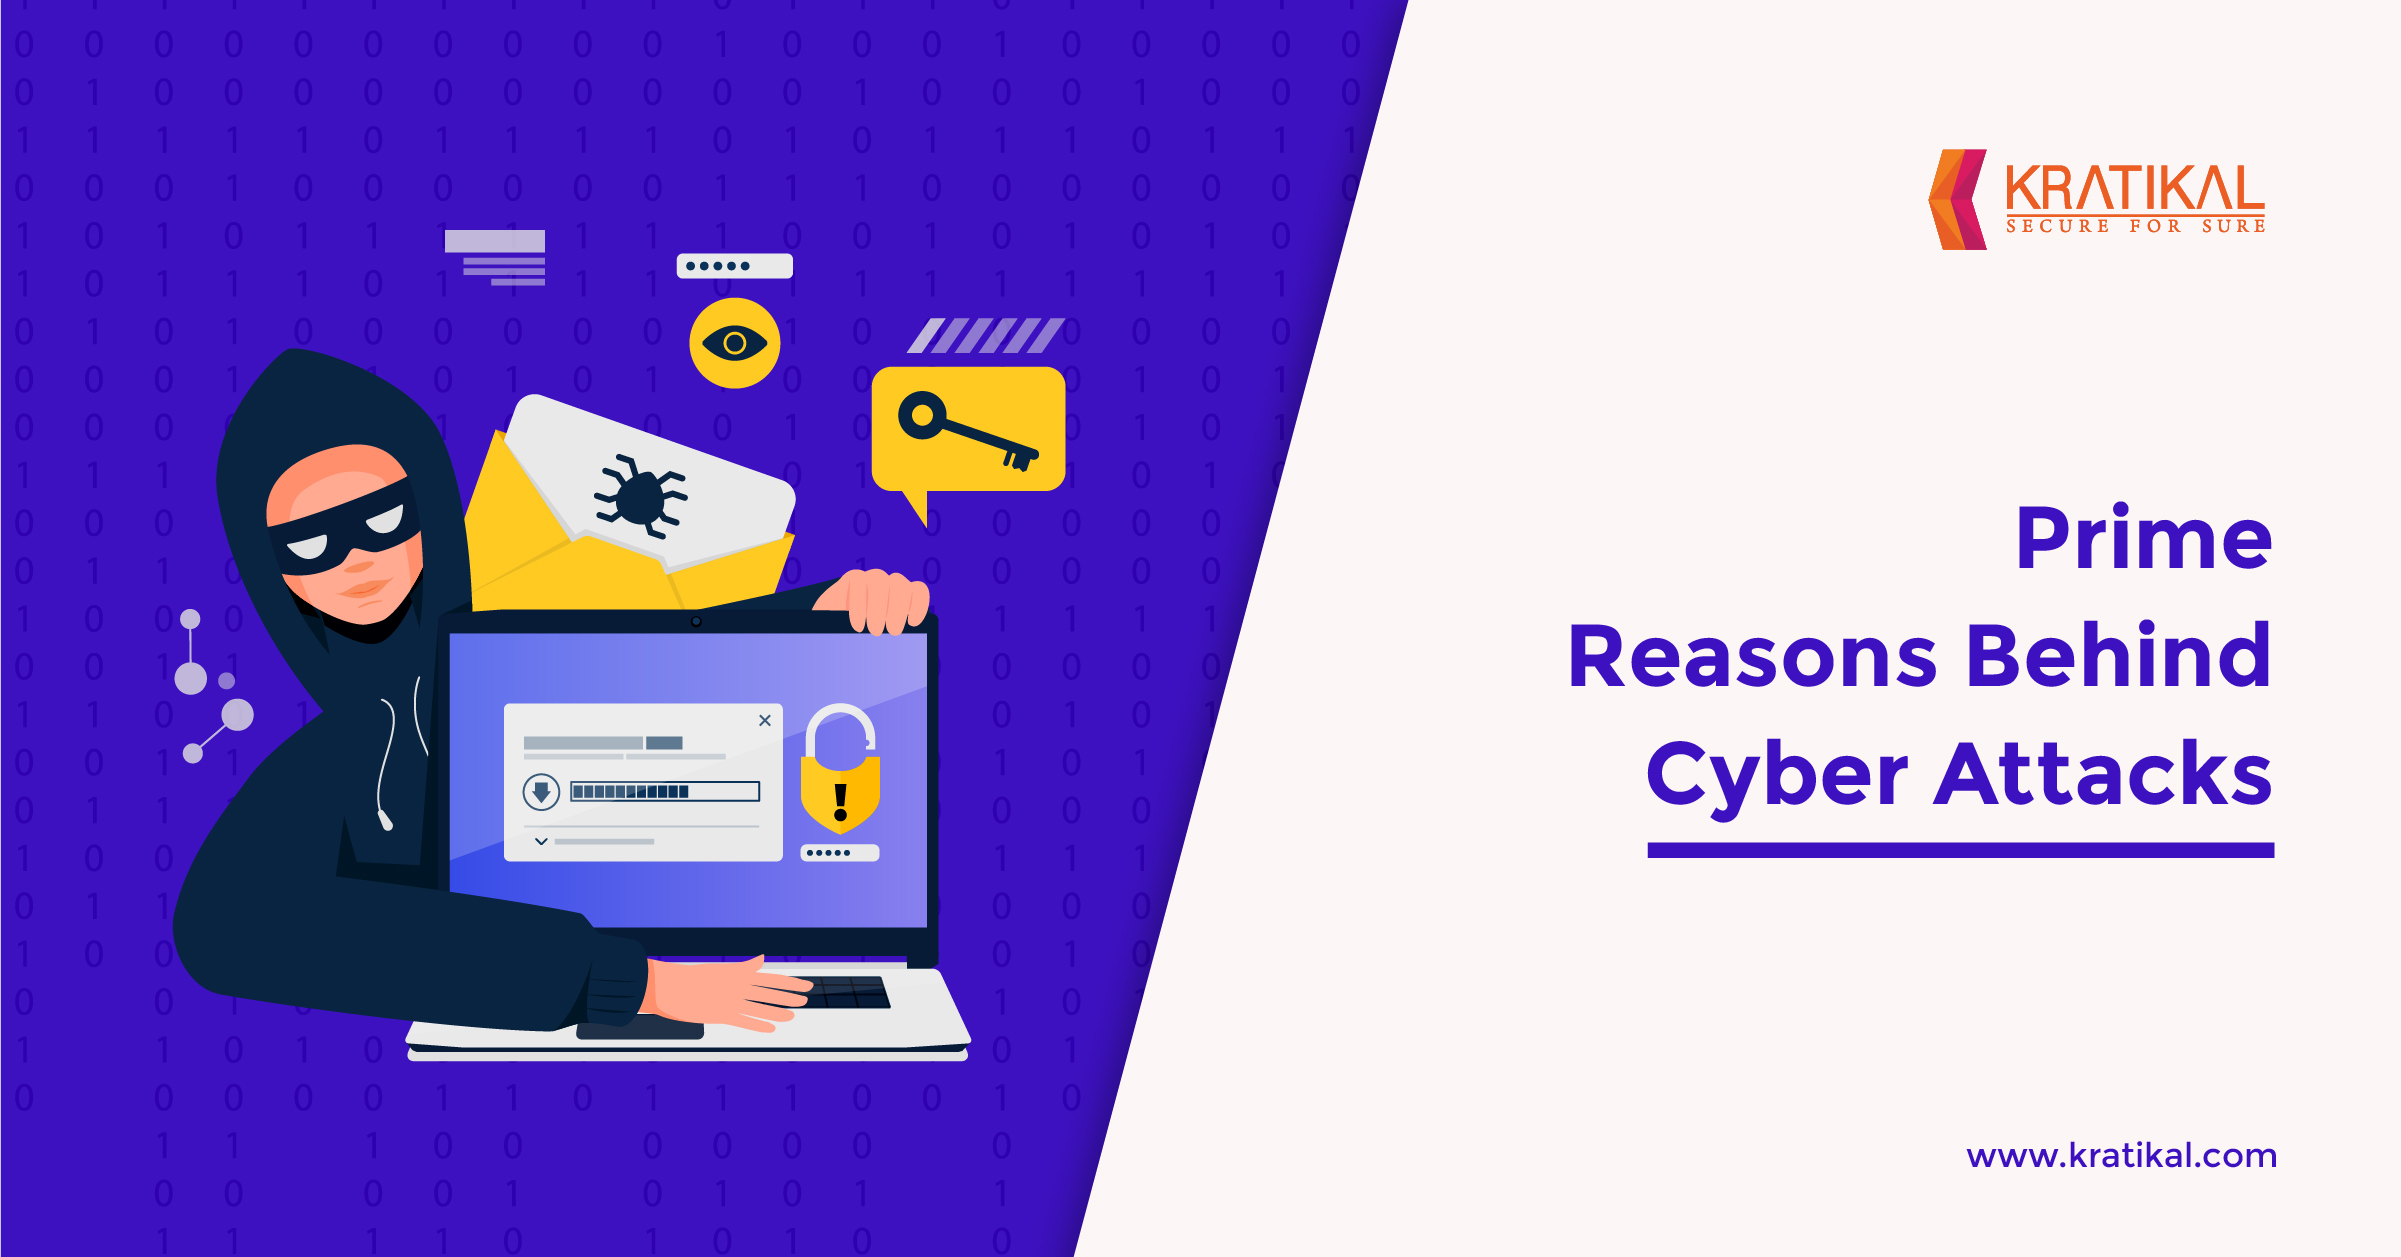 Prime Reasons Behind Cyber Attacks